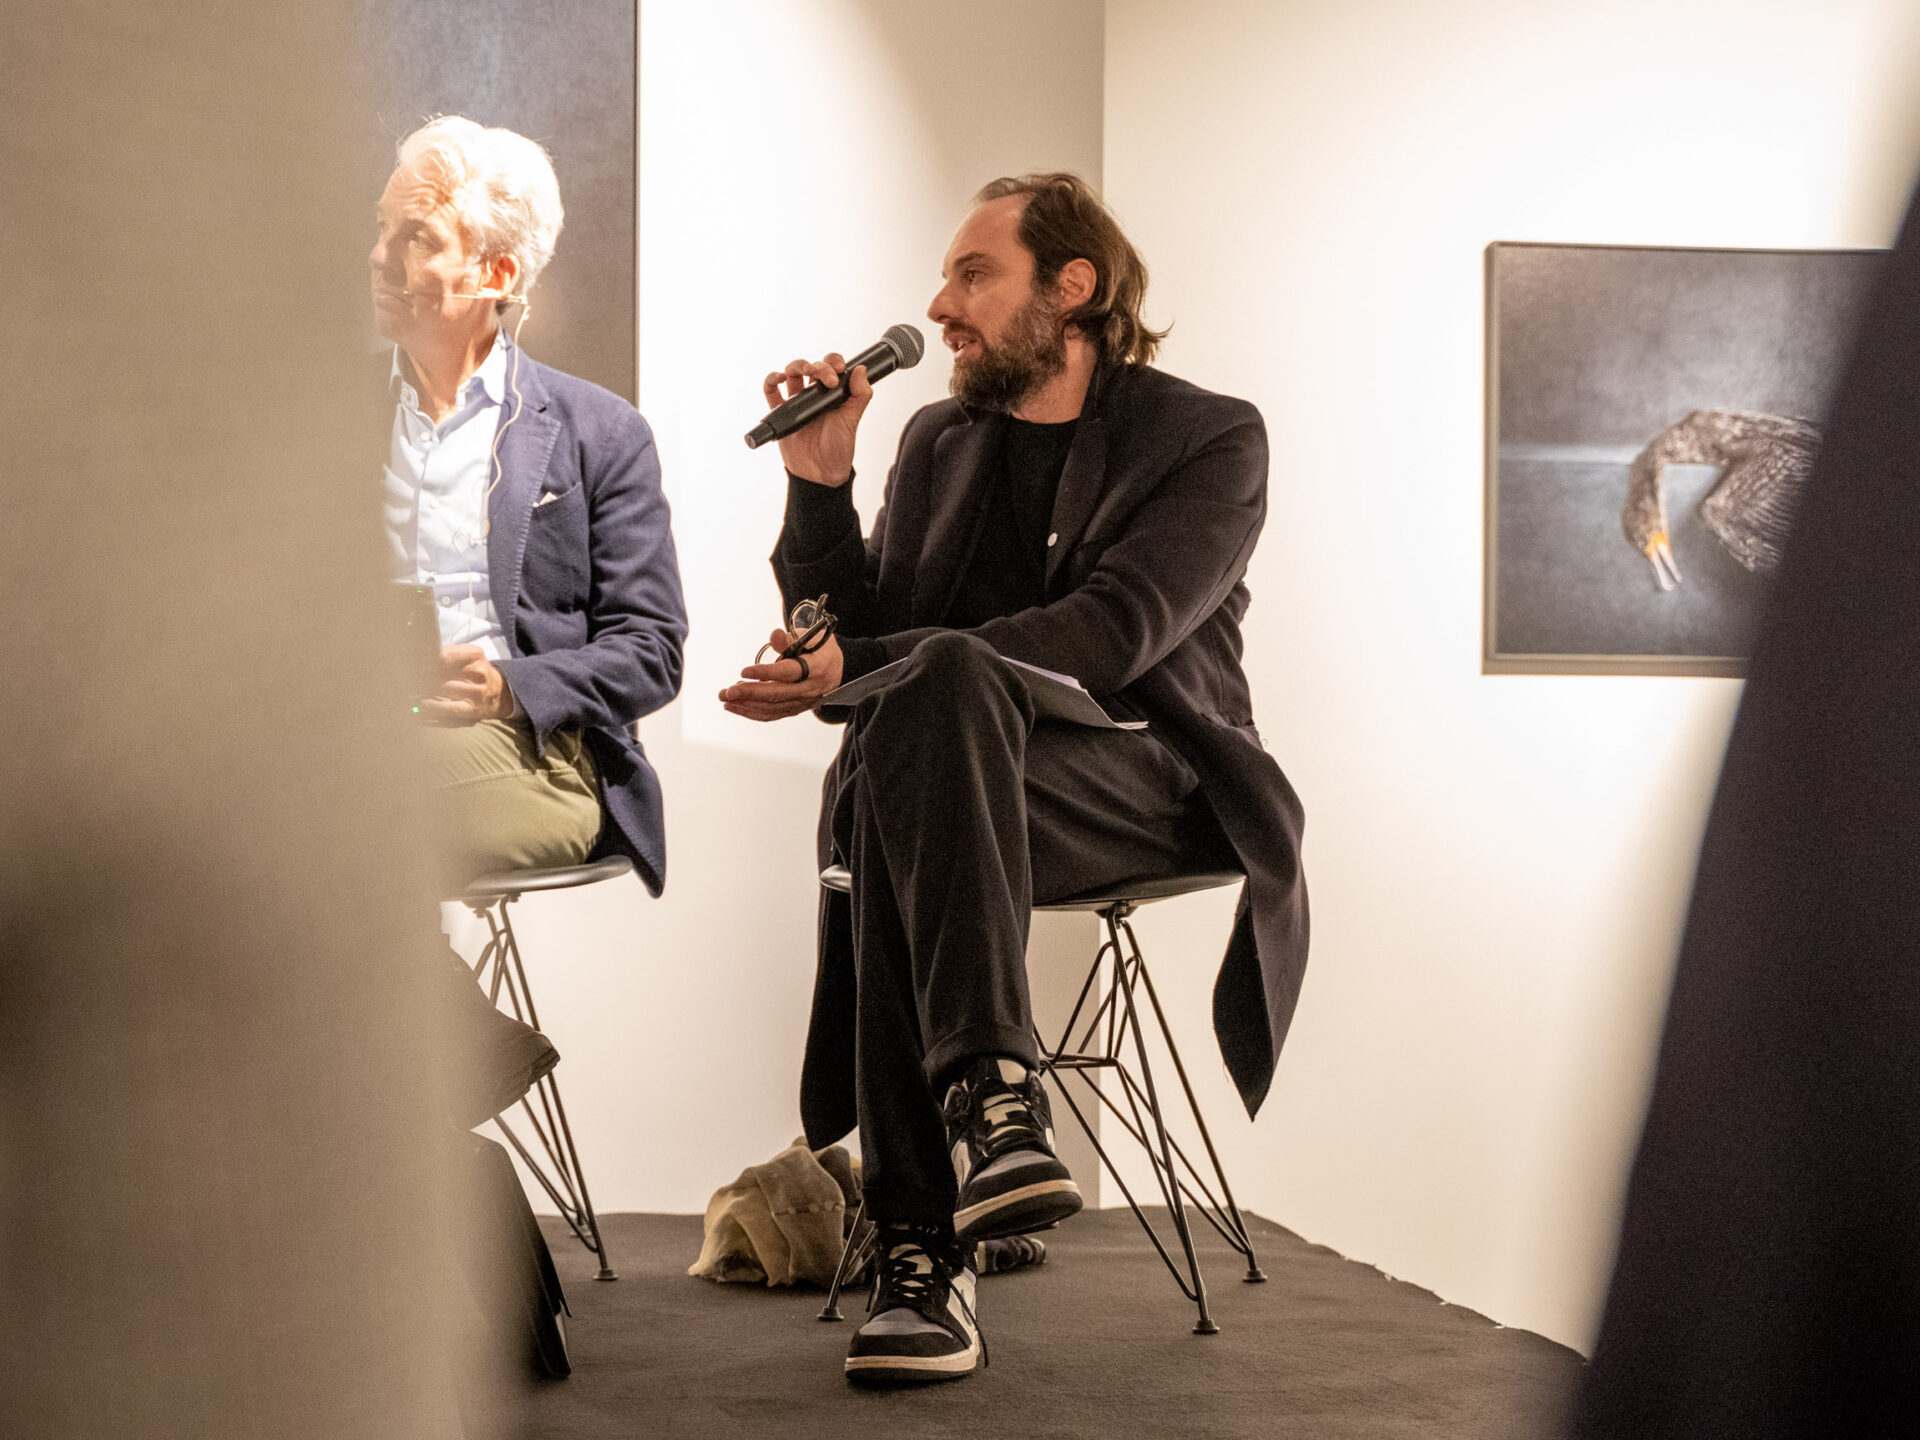 Belgium Sothebys Int. Realty Panel discussion on photography – ENG